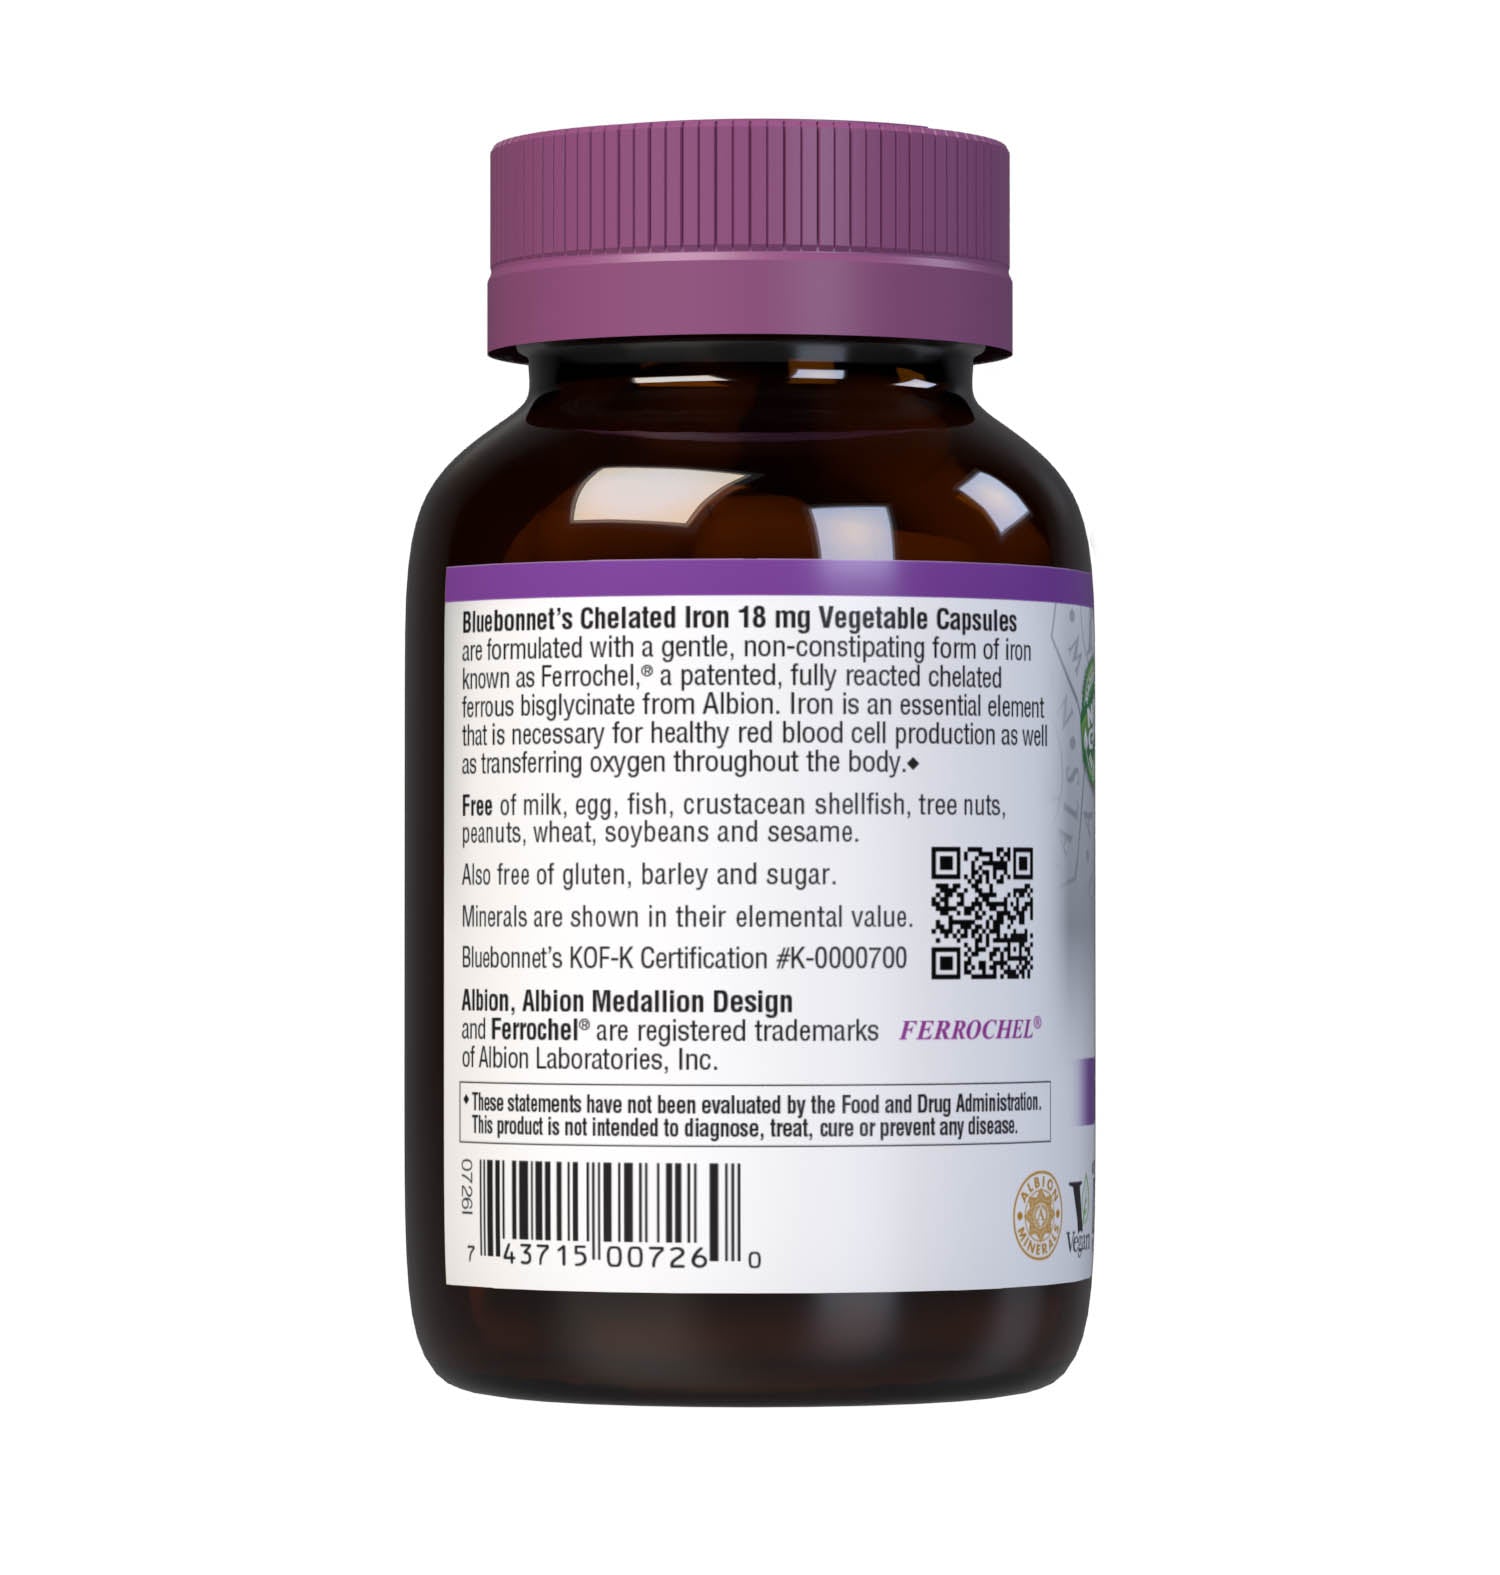 Bluebonnet's Chelated Iron 18 mg 90 Vegetable Capsules are formulated with a gentle, non-constipating form of iron known as Ferrochel, a patented, fully reacted chelated ferrous bisglycinate from Albion. Iron is an essential element that is necessary for healthy red blood cell production as well as transferring oxygen throughout the body. Description panel. #size_90 count